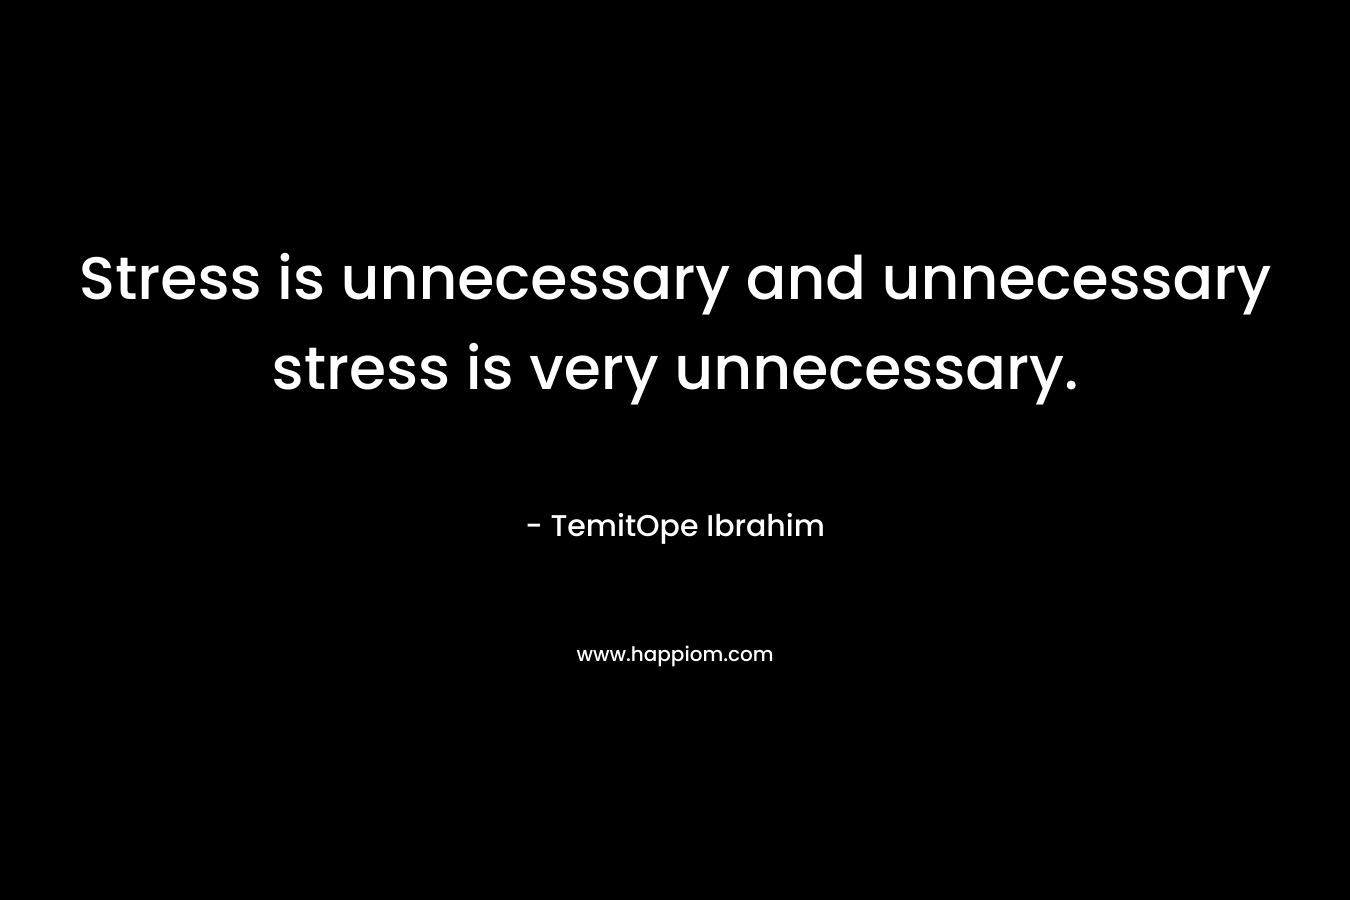 Stress is unnecessary and unnecessary stress is very unnecessary. – TemitOpe Ibrahim